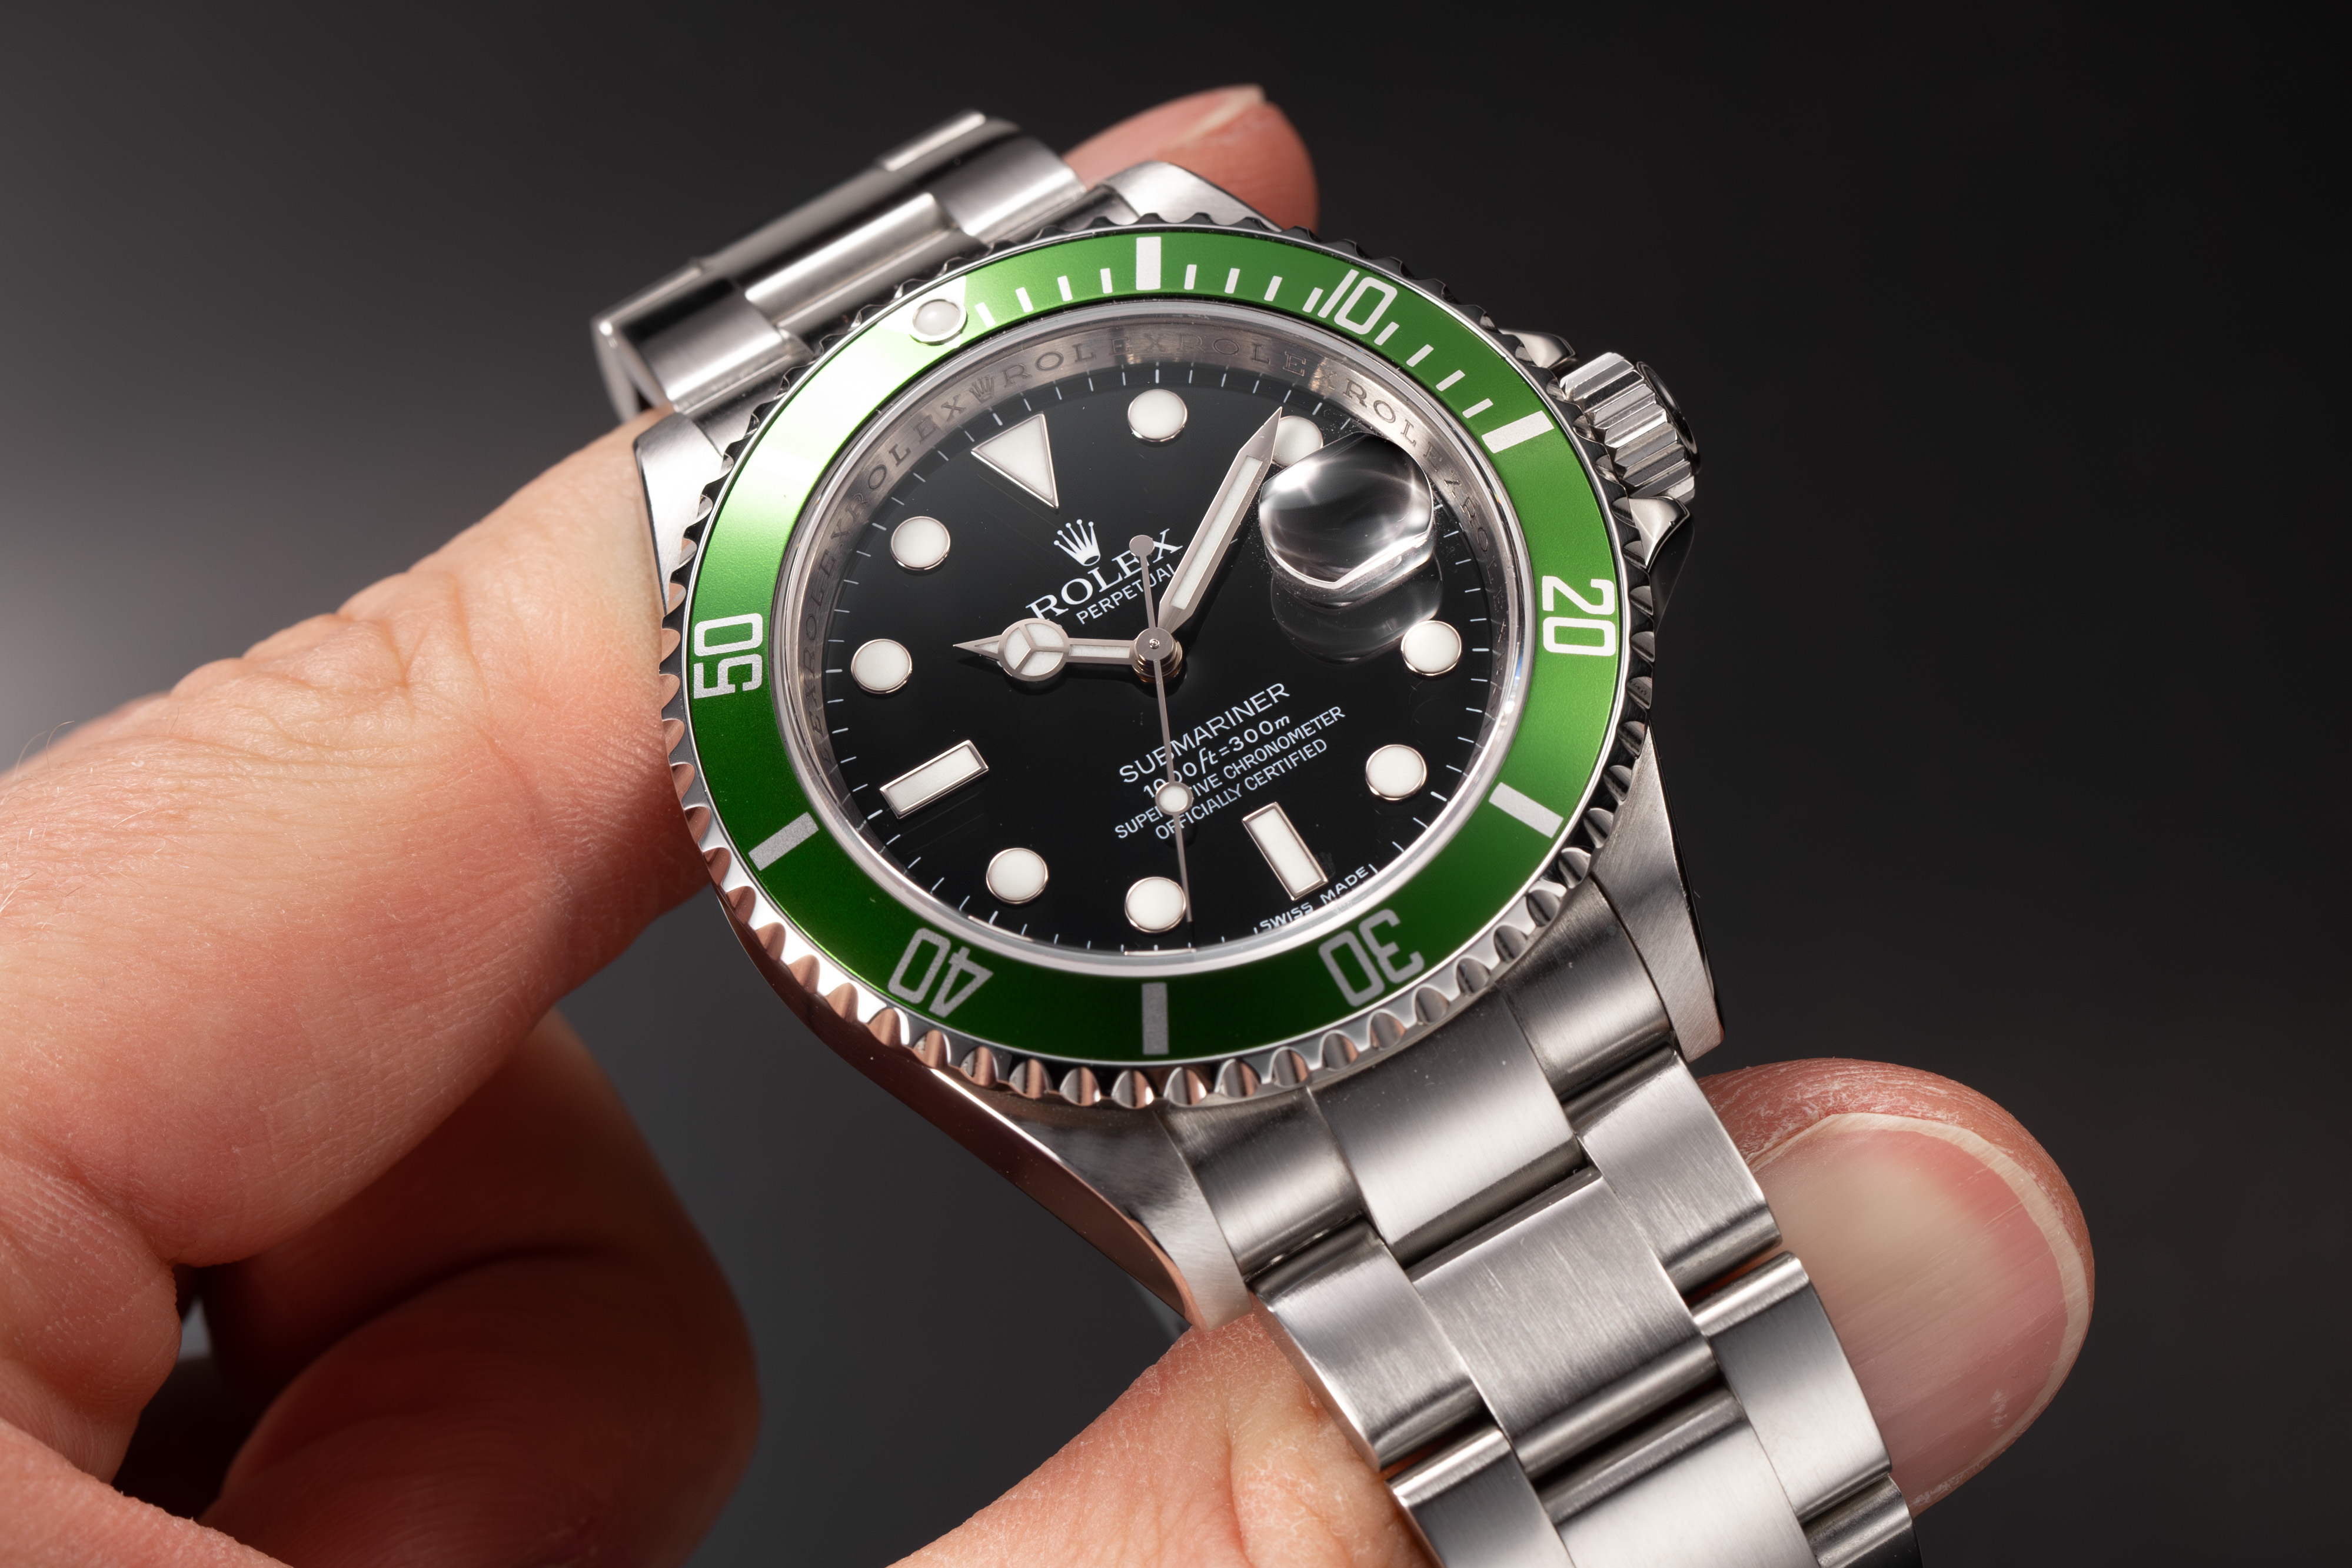 Why is the Rolex Submariner so Popular?